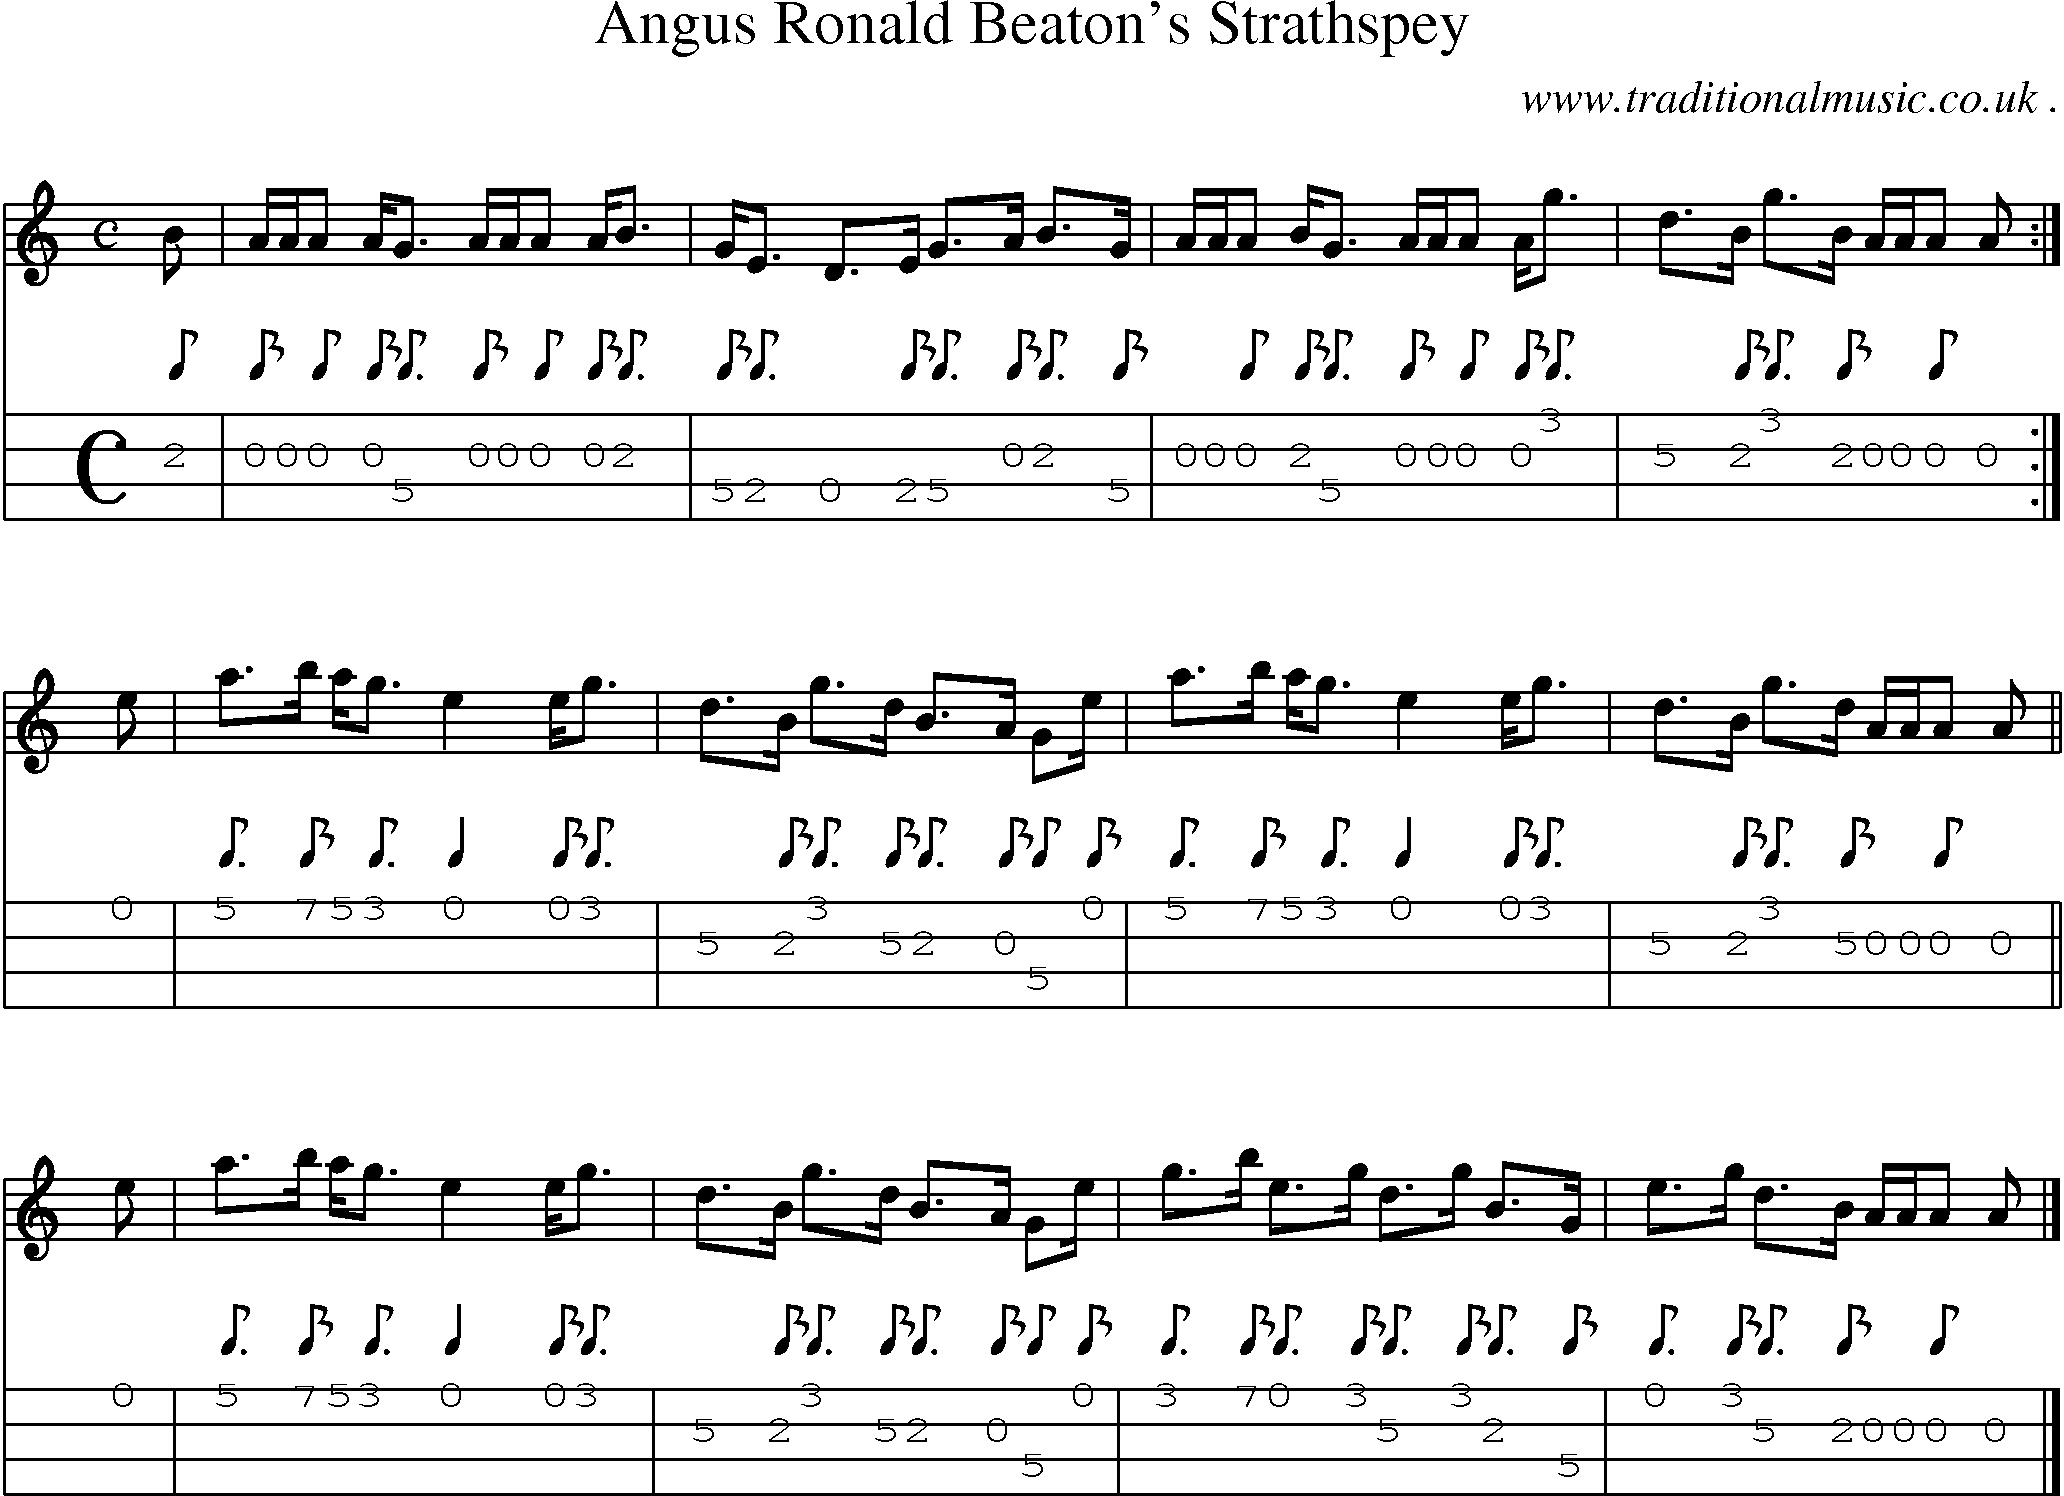 Sheet-music  score, Chords and Mandolin Tabs for Angus Ronald Beatons Strathspey